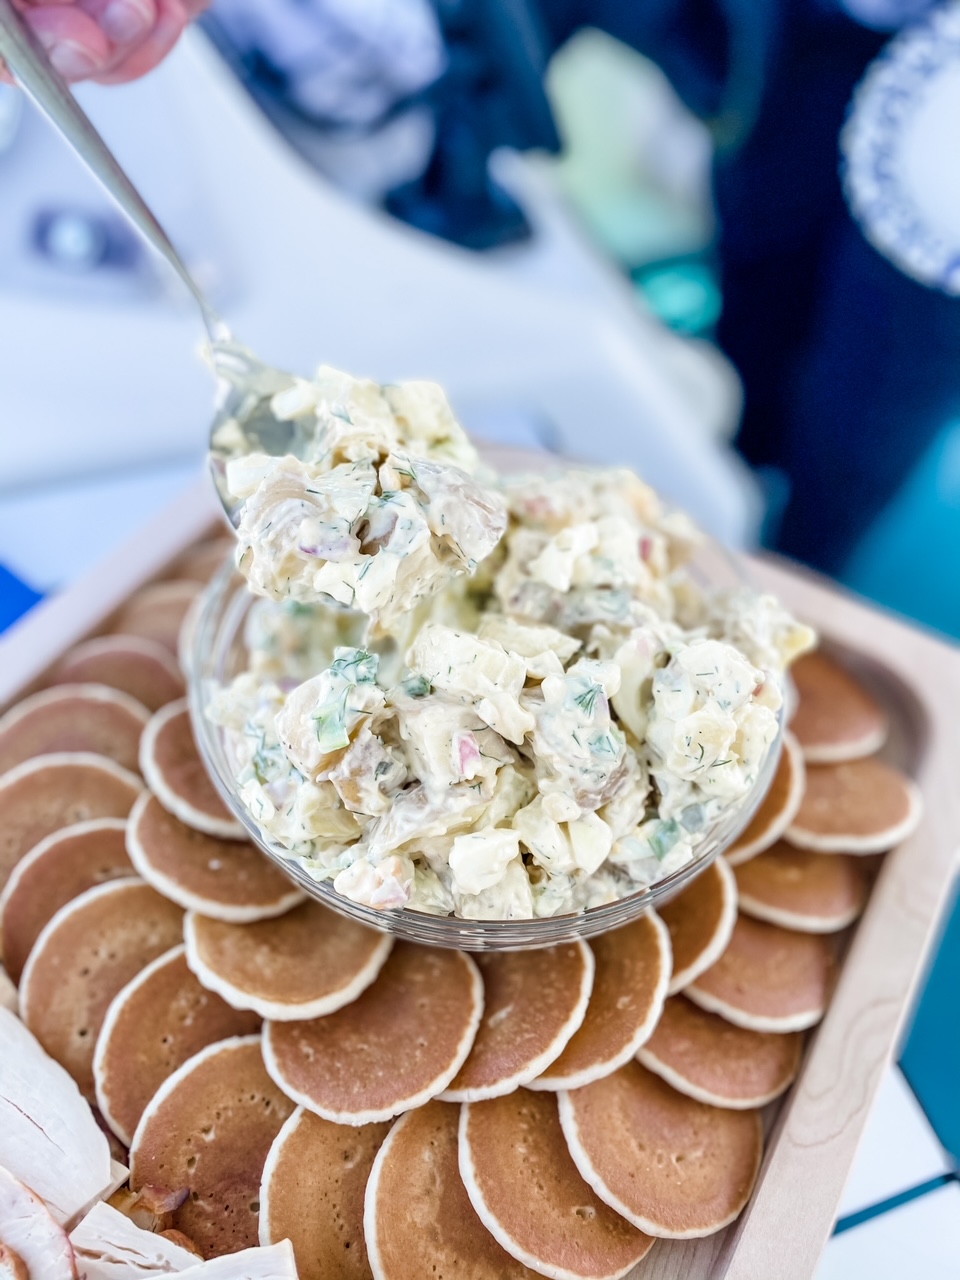 A bowl of the Potato Salad with Dill surrounded by small pancakes on a serving dish